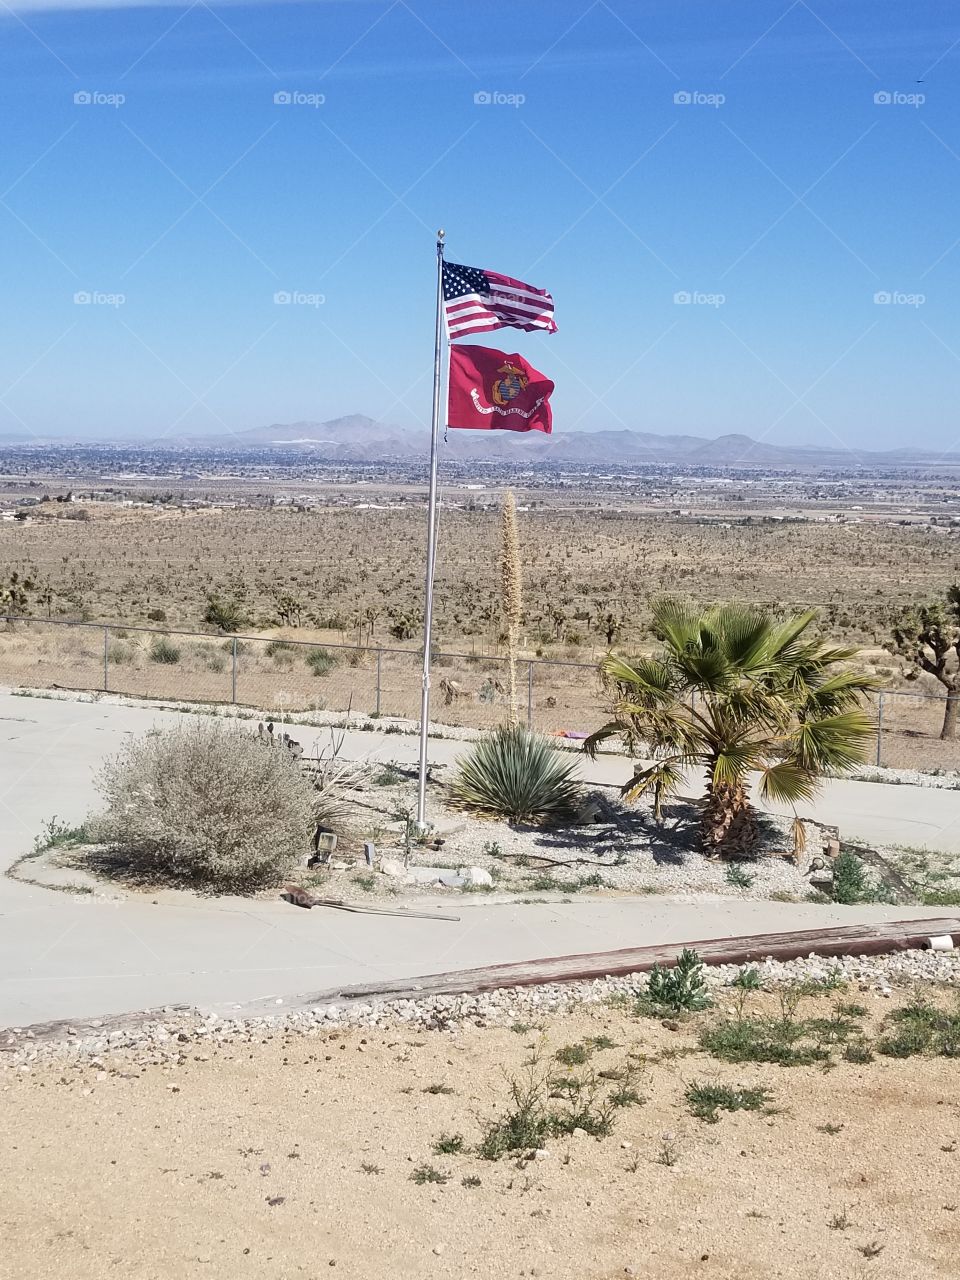 Magnificent United States Of the America American flag and United States Marine Militry Flag outside a small farm in the desert in California.